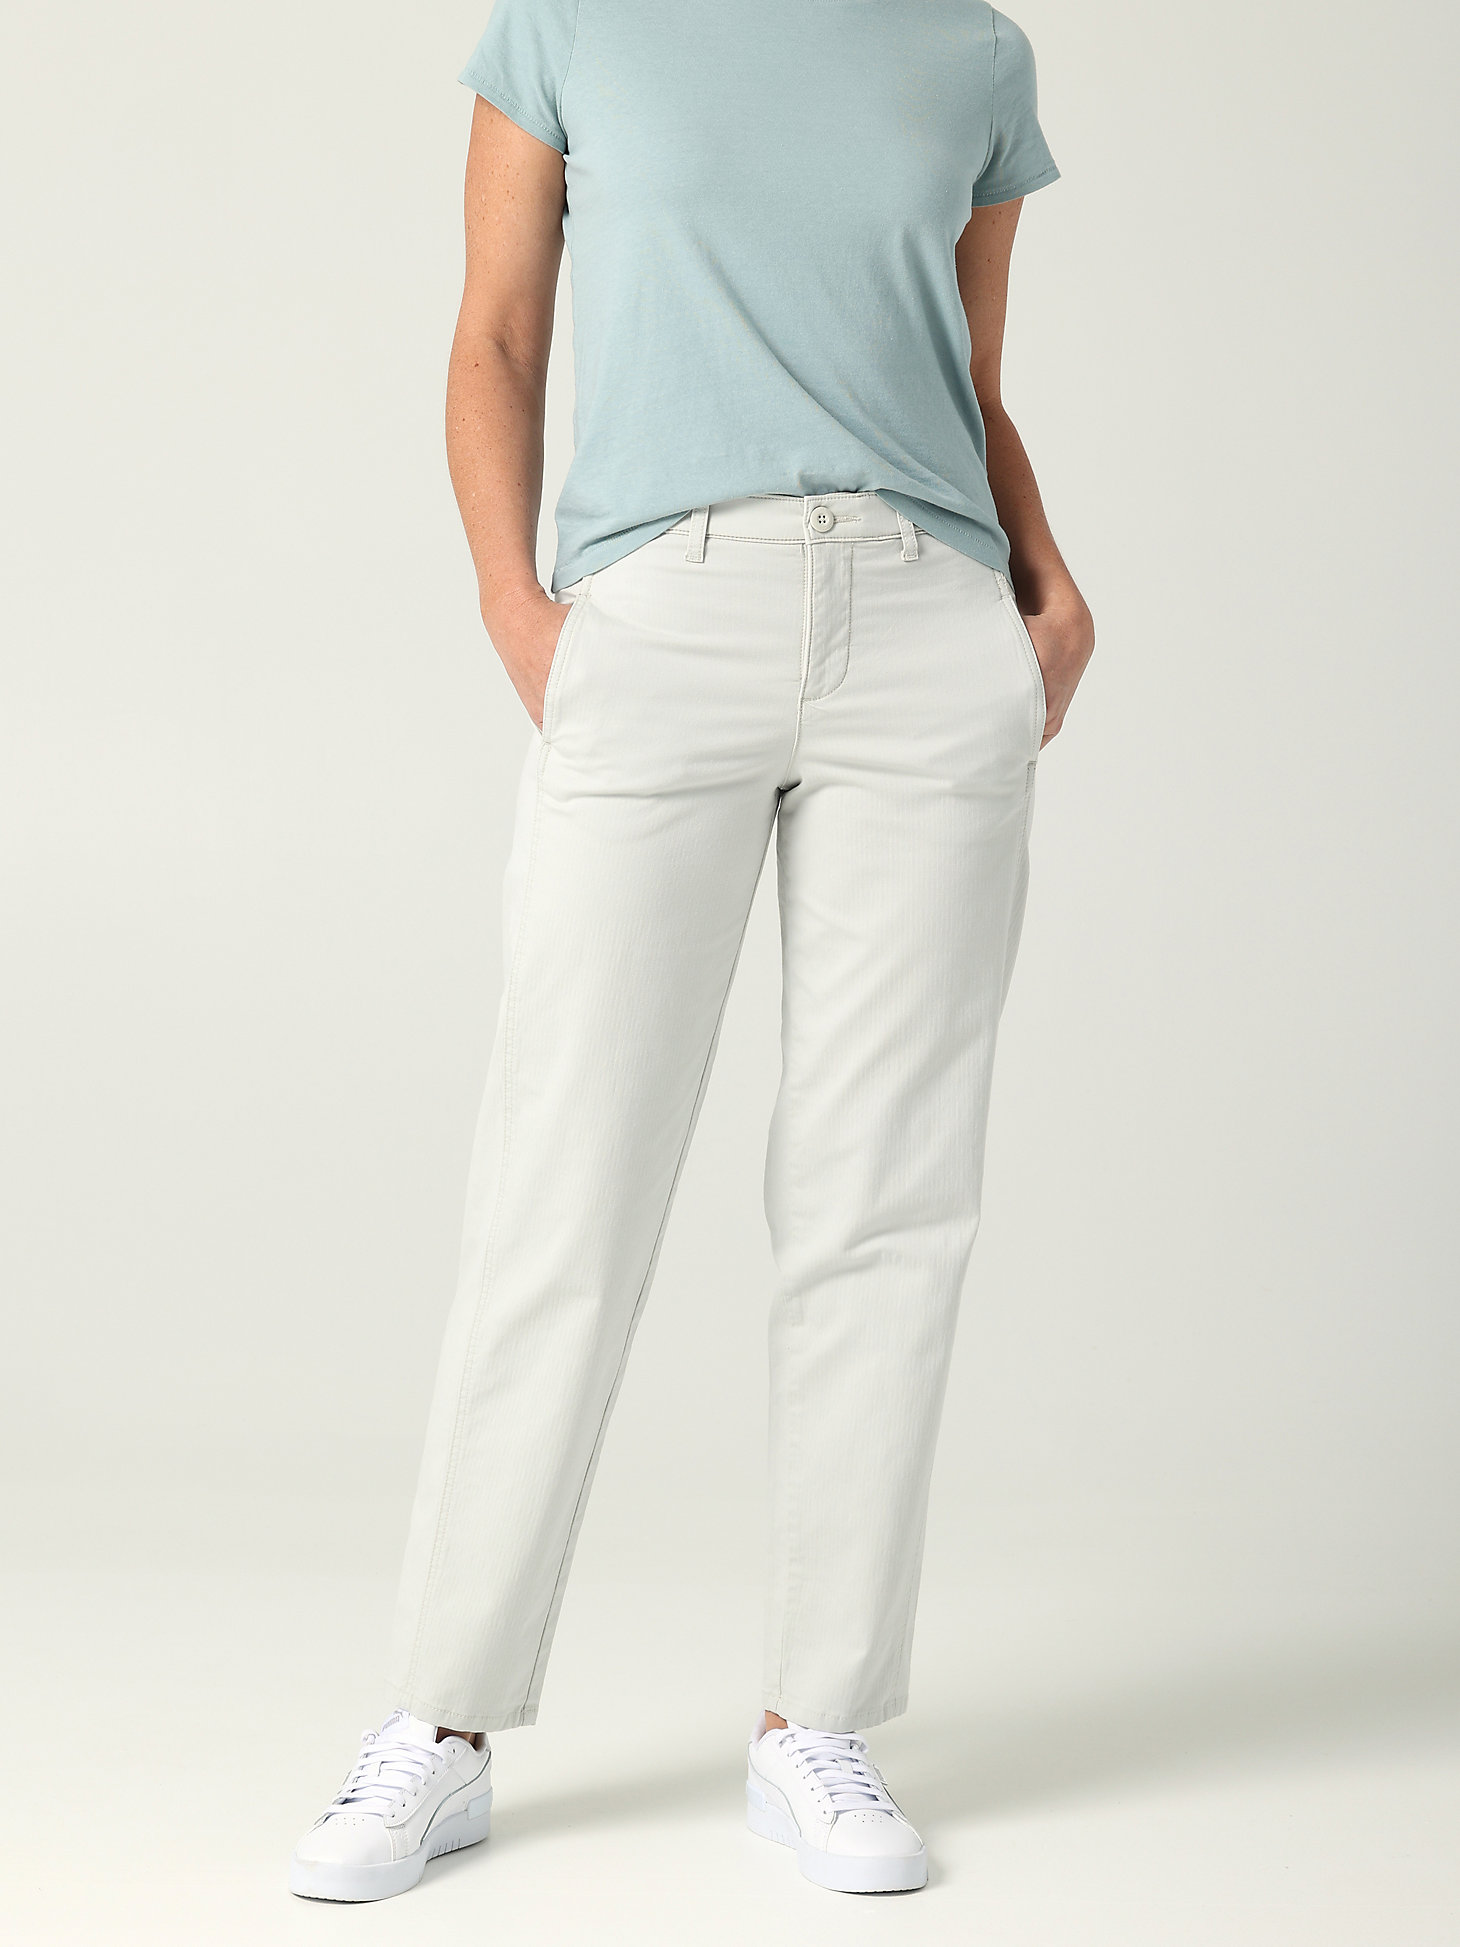 Women's Ultra Lux Relaxed Straight Pant in White Smoke main view